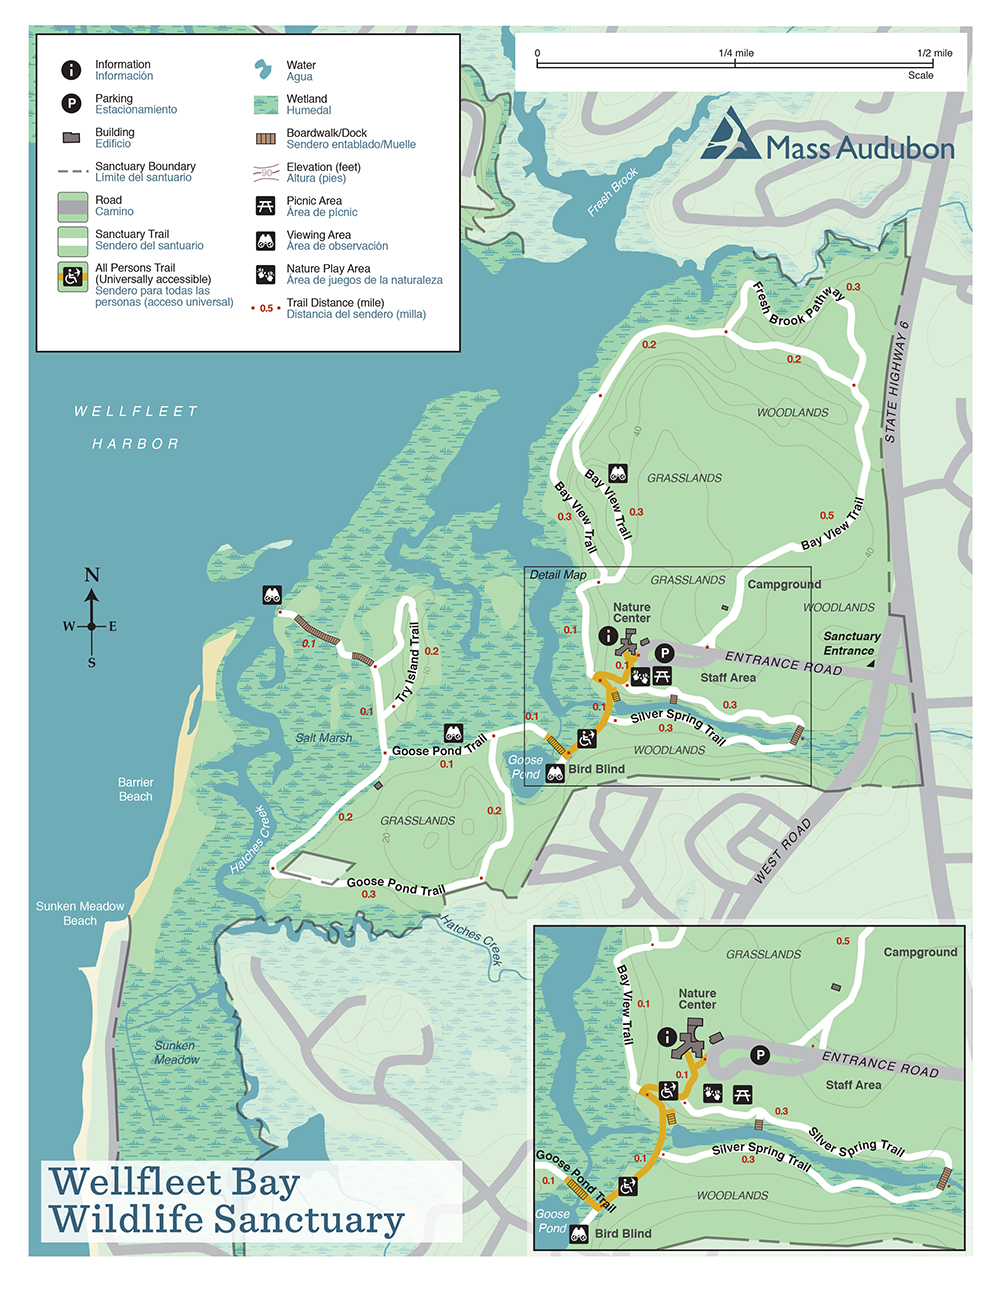 Wellfeet Bay Wildlife Sanctuary trail map in full color